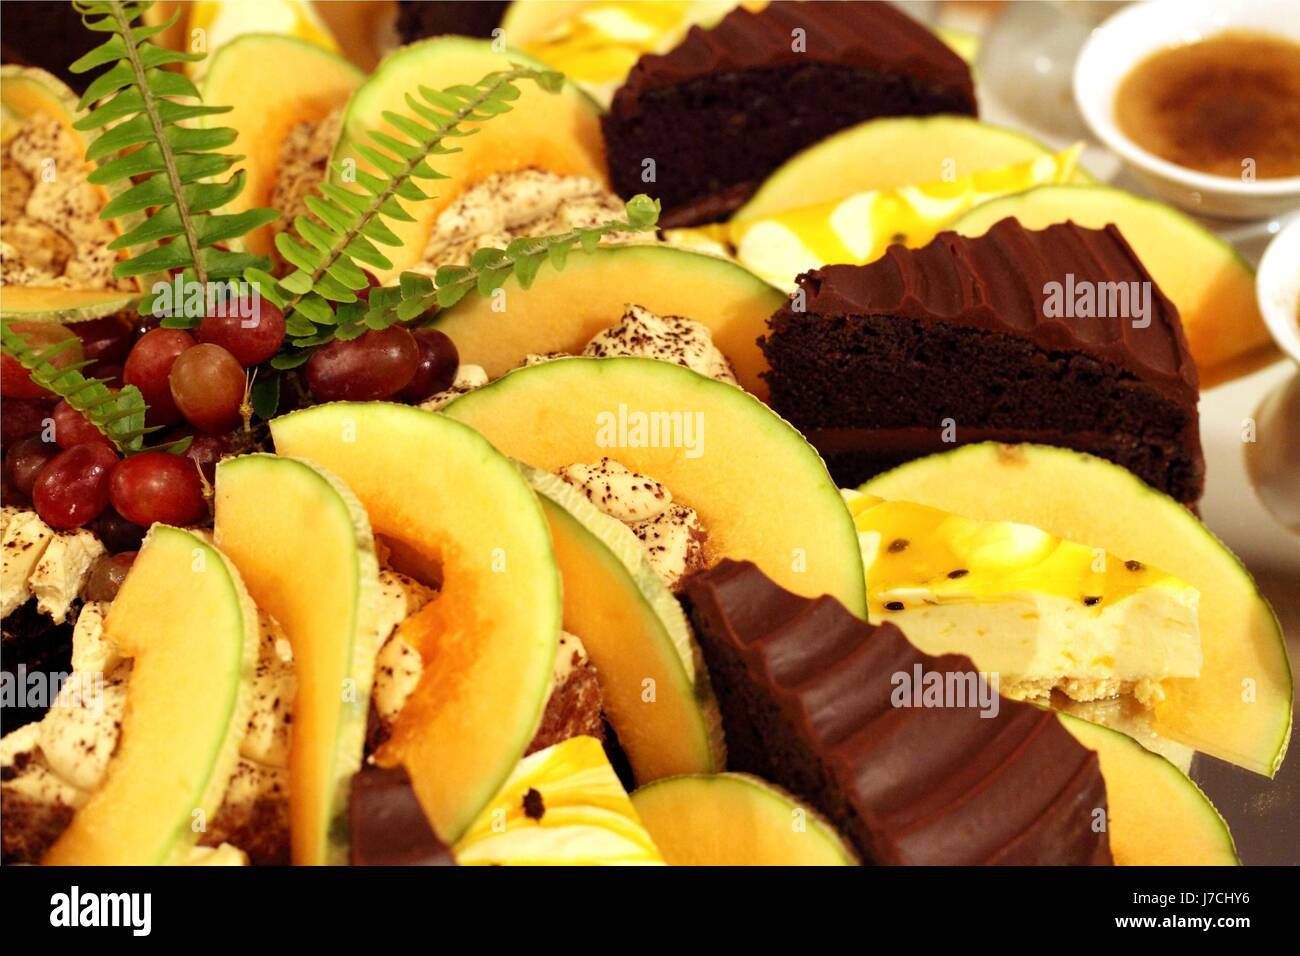 dessert cake pie cakes decoration melon cream sideboard kitchens grapes bunches Stock Photo